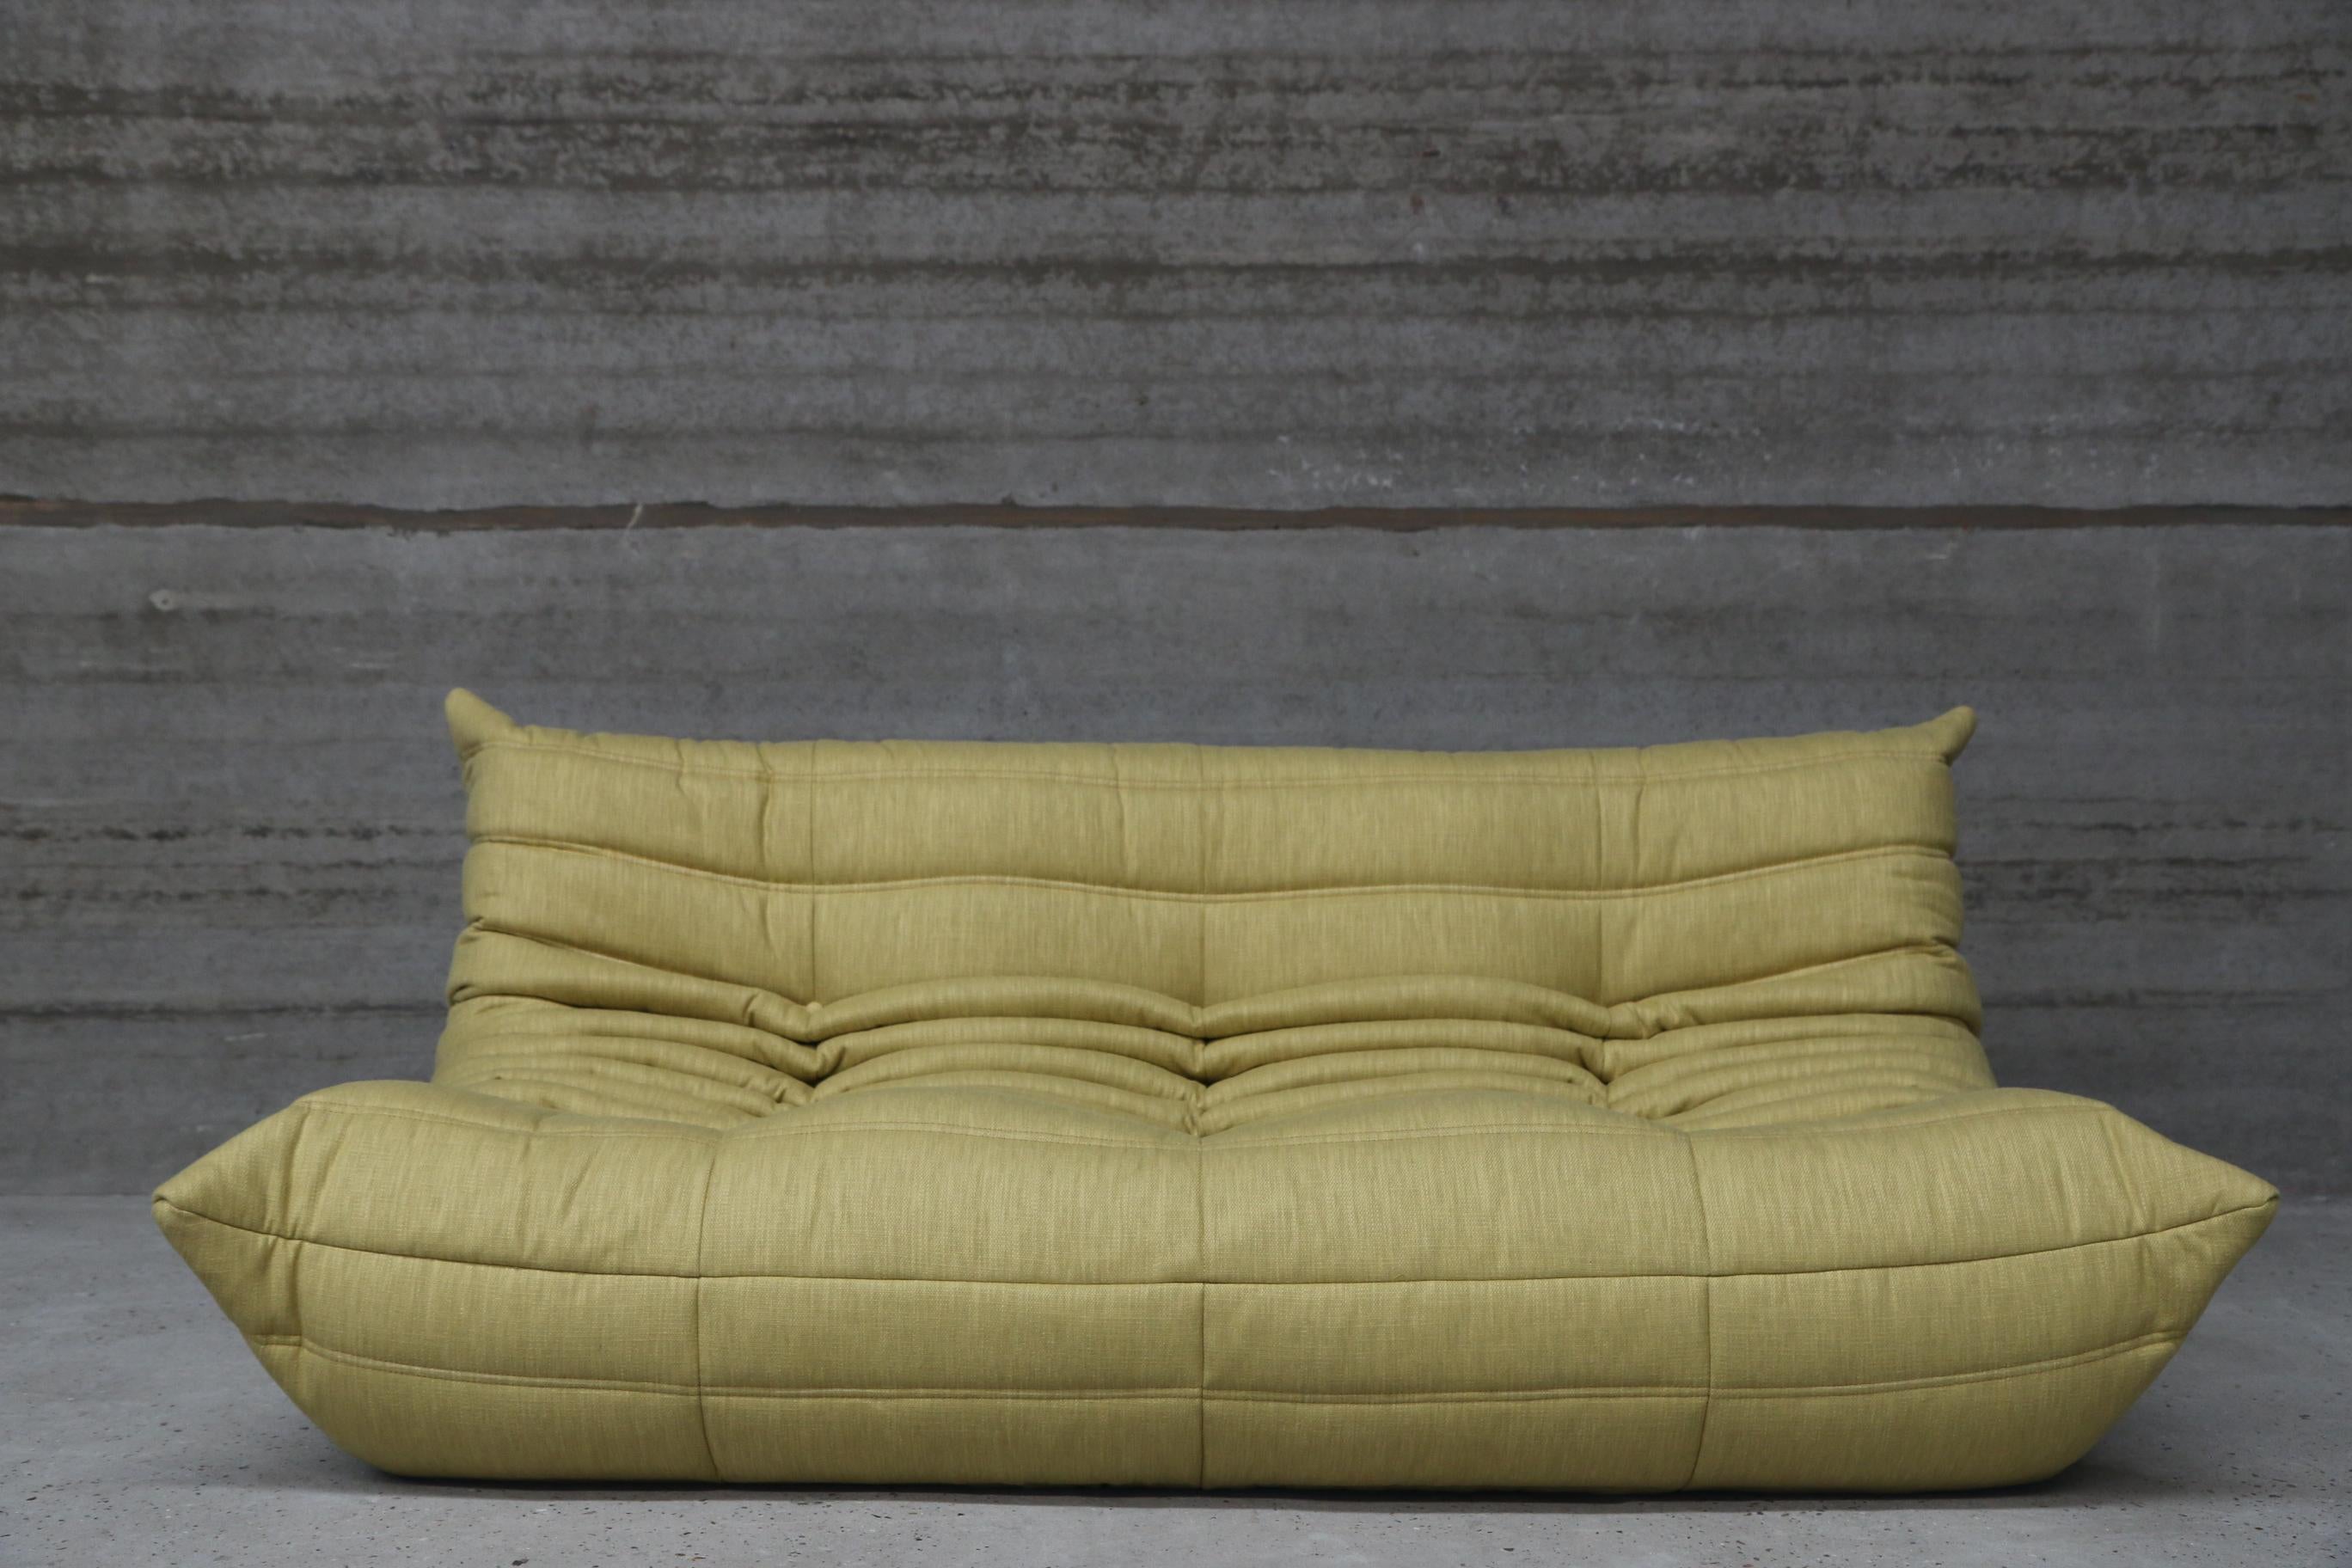 Iconic French vintage large settee, beautifully reupholstered in our brand new, stain free, washable and very durable Cordoba chartreuse fabric.
Original genuine vintage 